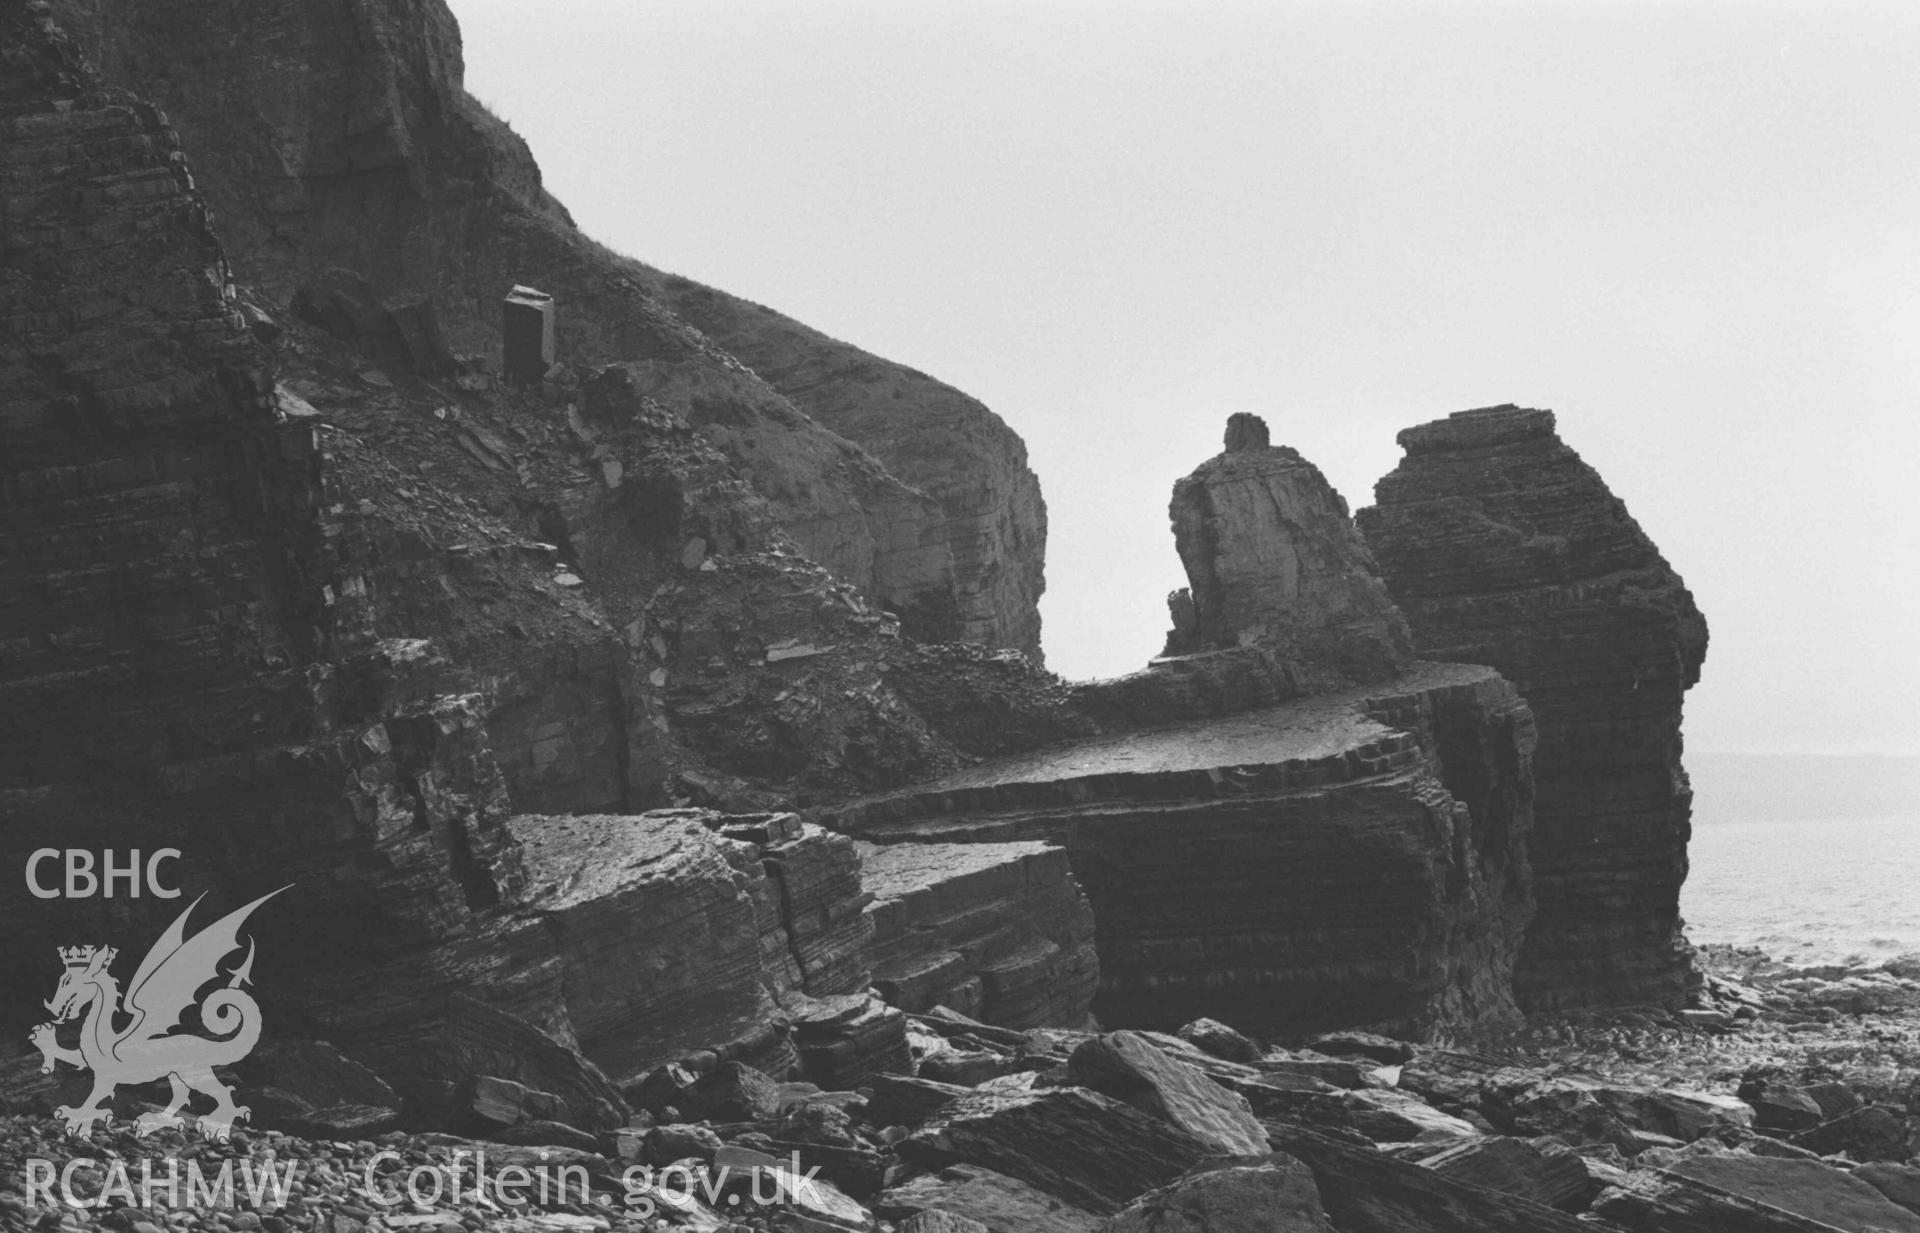 Digital copy of a black and white negative showing rocks on the coast 350m west south west of the mouth of the afon Cwinten, at low tide. Photographed by Arthur Chater on 3 January 1969. Looking west from Grid Reference SN 4322 6123.